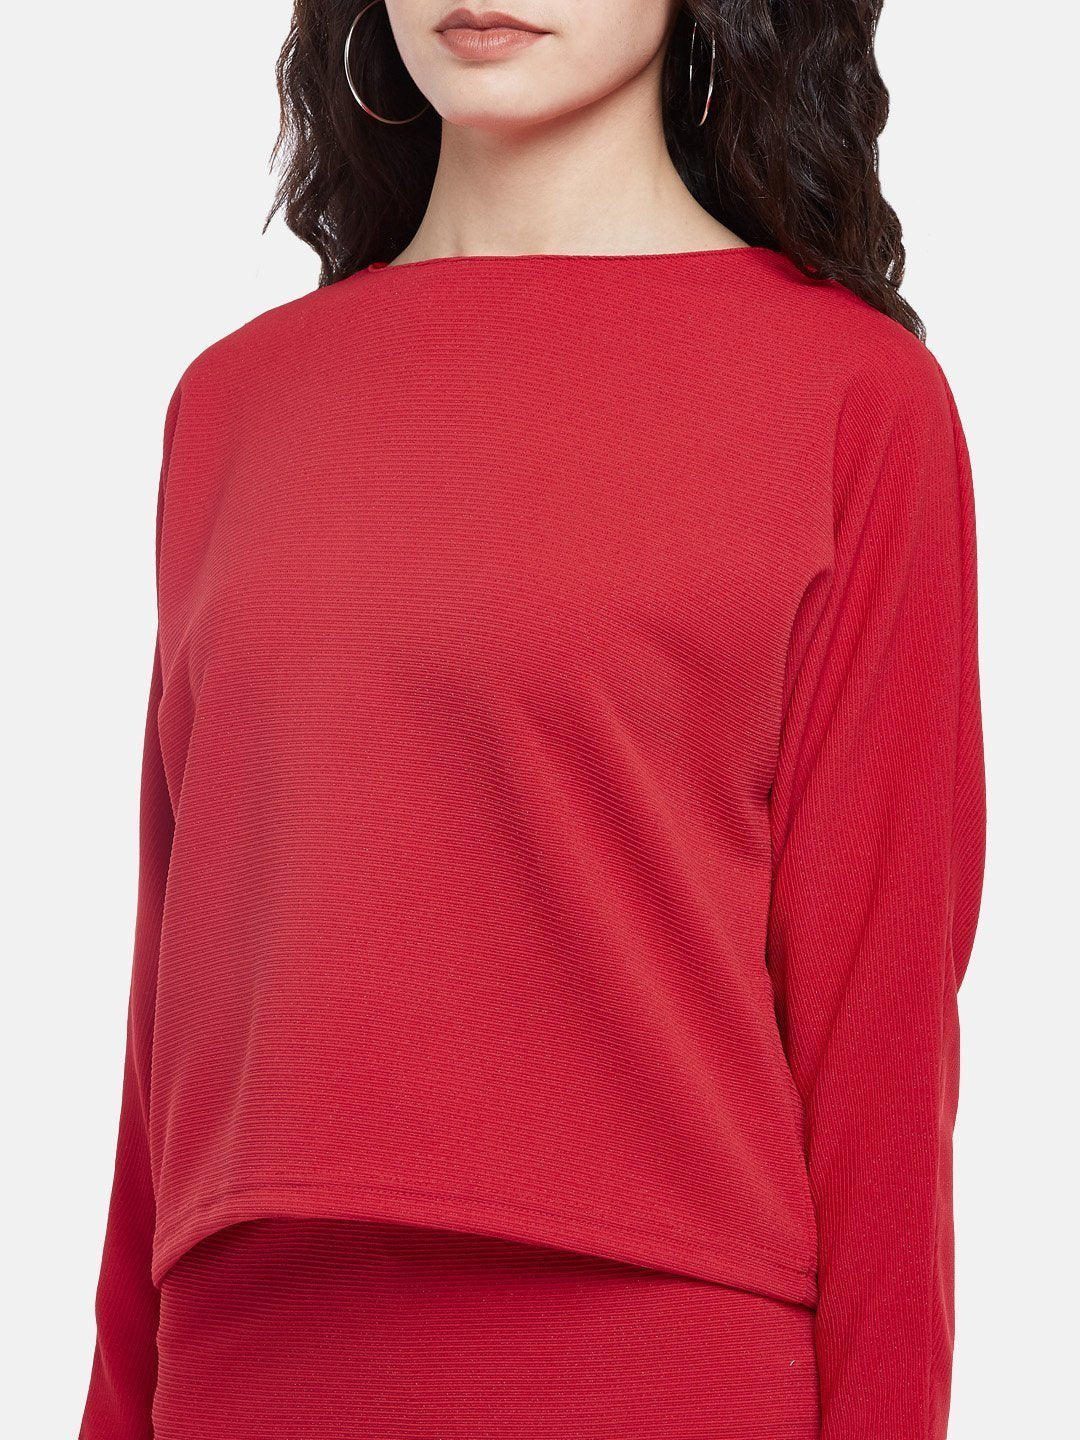 IS.U Red Shimmer Boxy Fit Top